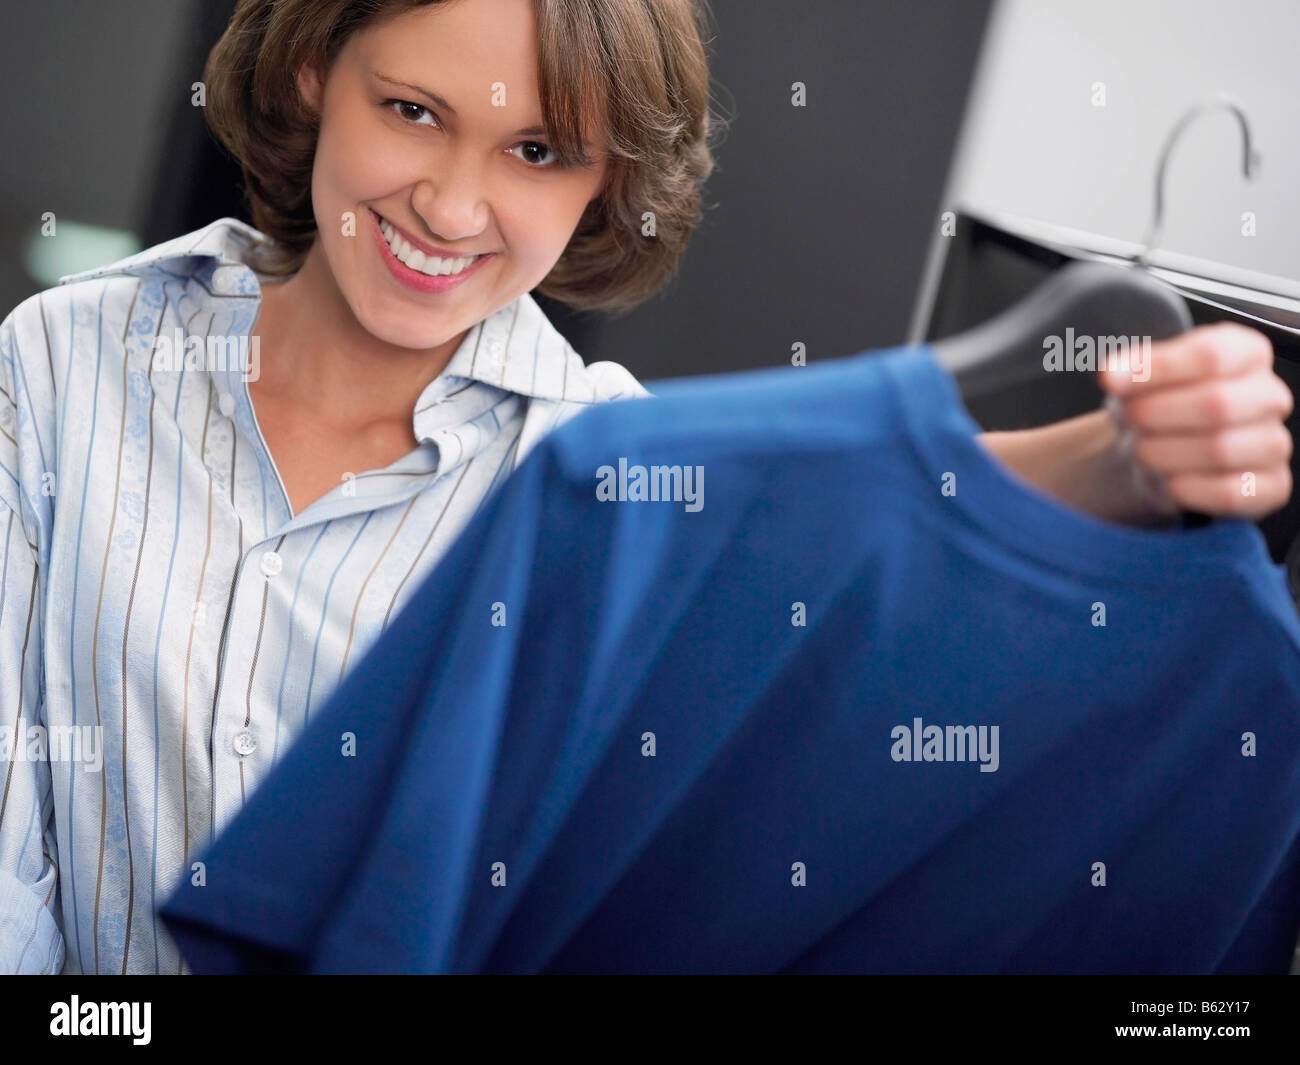 Portrait of a young woman holding a t-shirt on a hanger and smiling Stock Photo